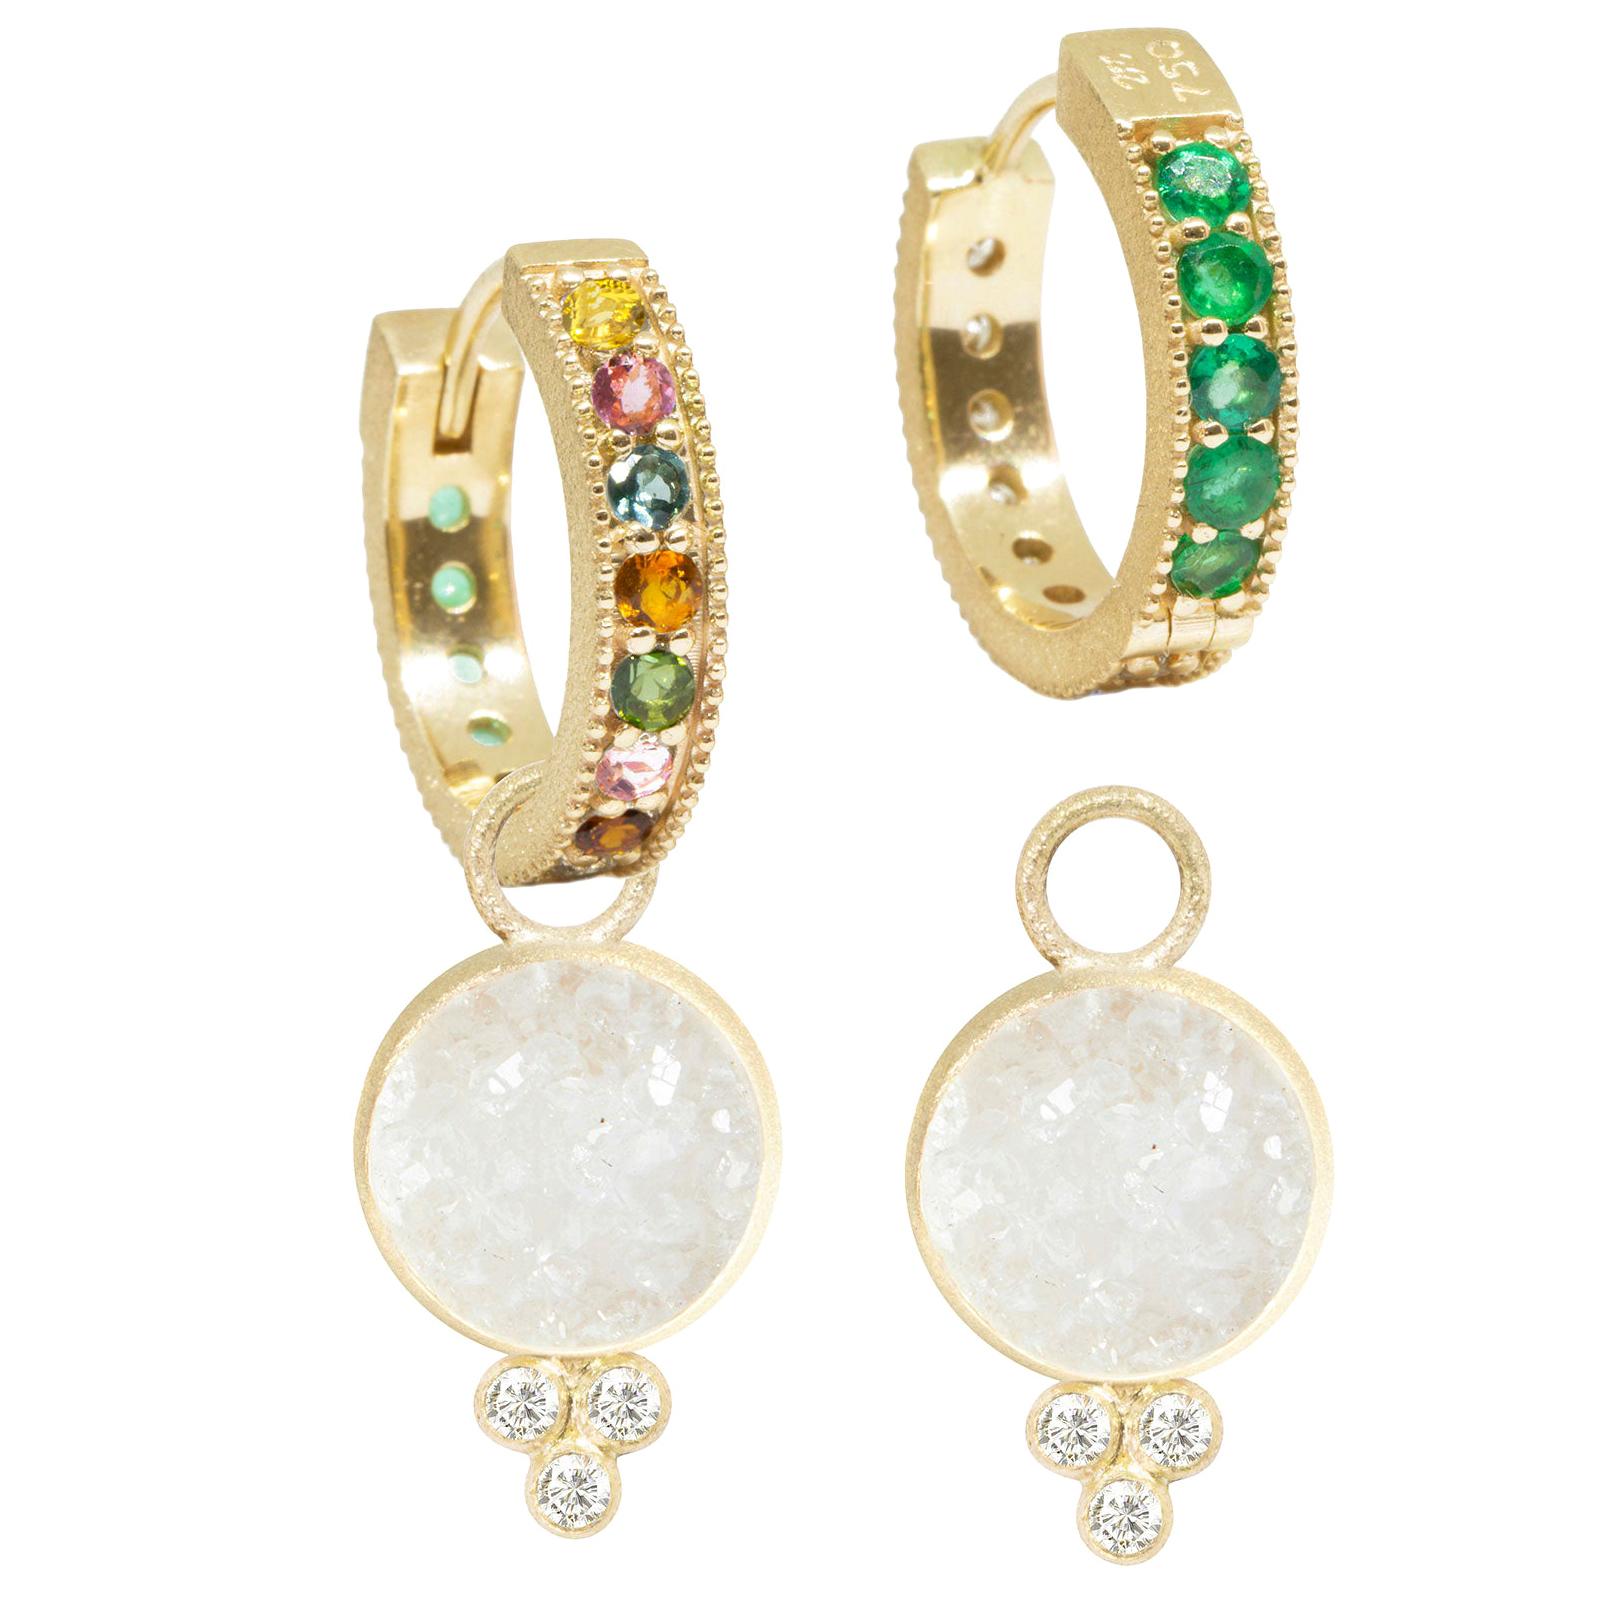 Chloe White Druzy Charms and Intricate 18 Karat Gold Reversible Huggies Earrings For Sale